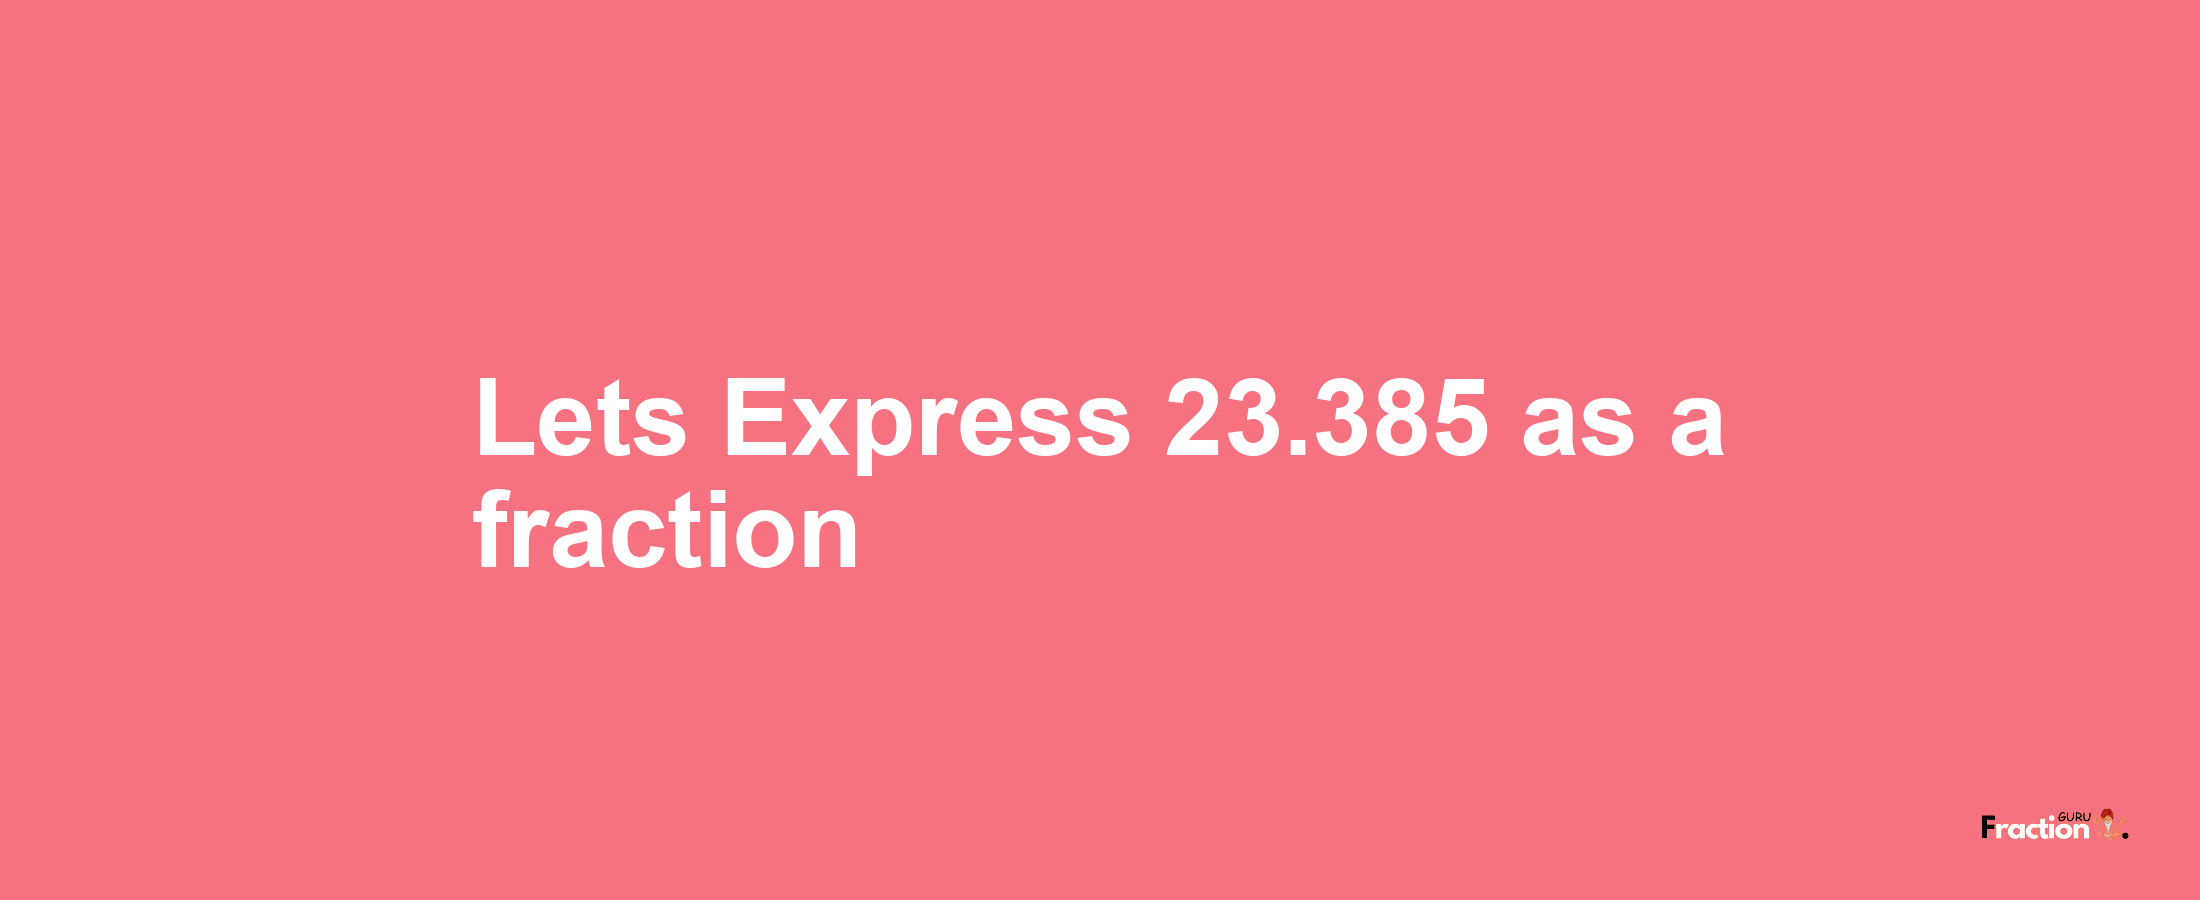 Lets Express 23.385 as afraction